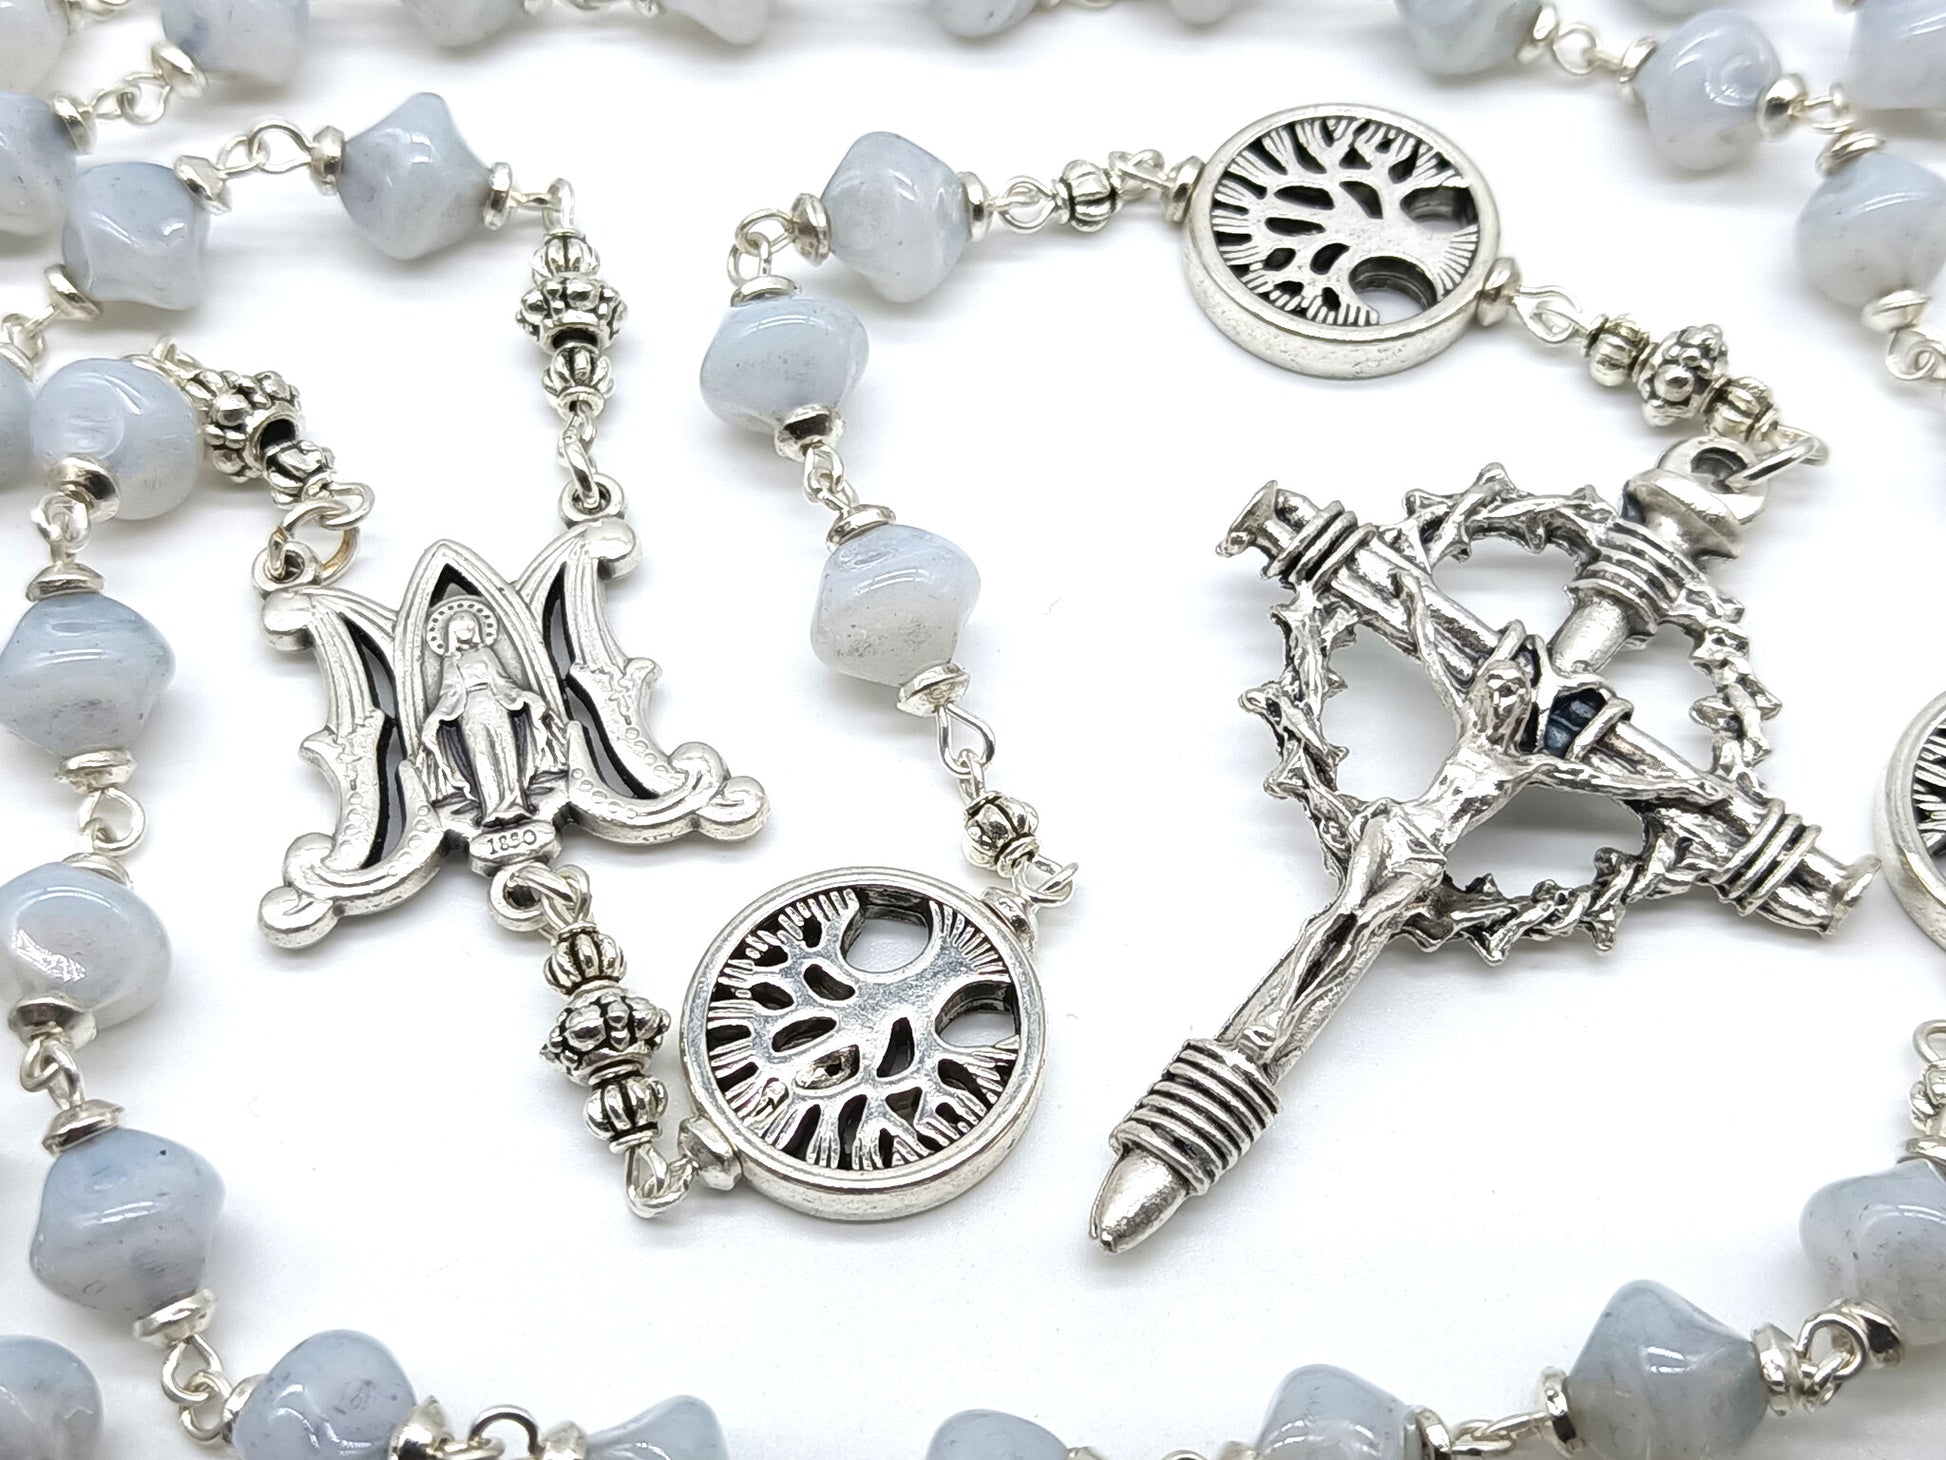 Tree of life rosary beads with white lamp glass and silver crucifix and miraculous medal centre.